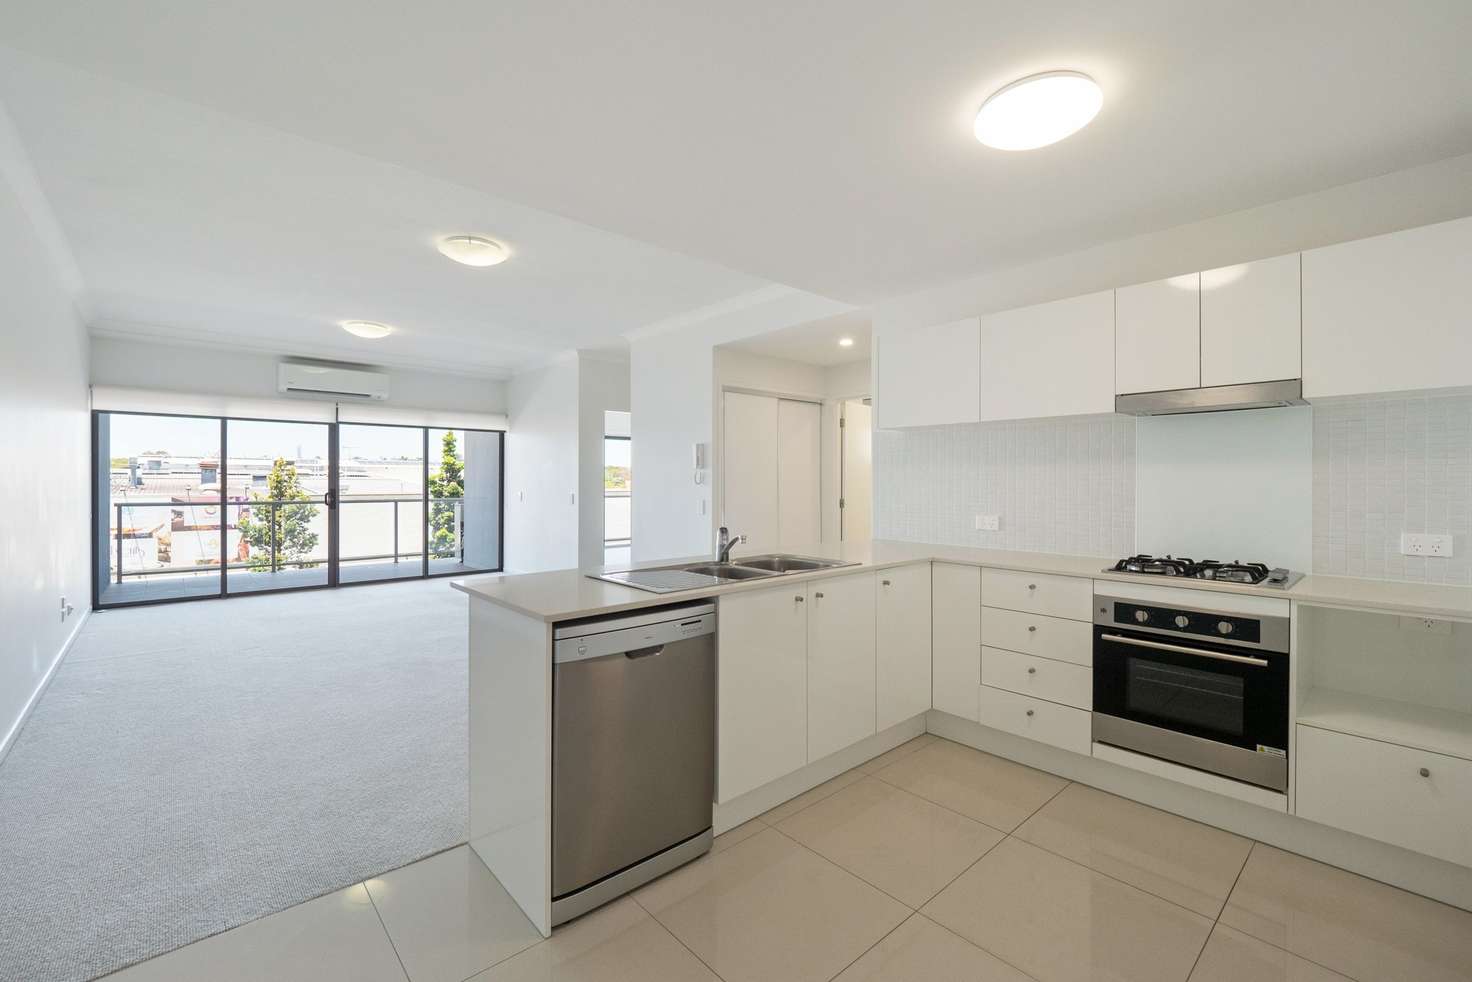 Main view of Homely apartment listing, 2305/19 Playfield Street, Chermside QLD 4032